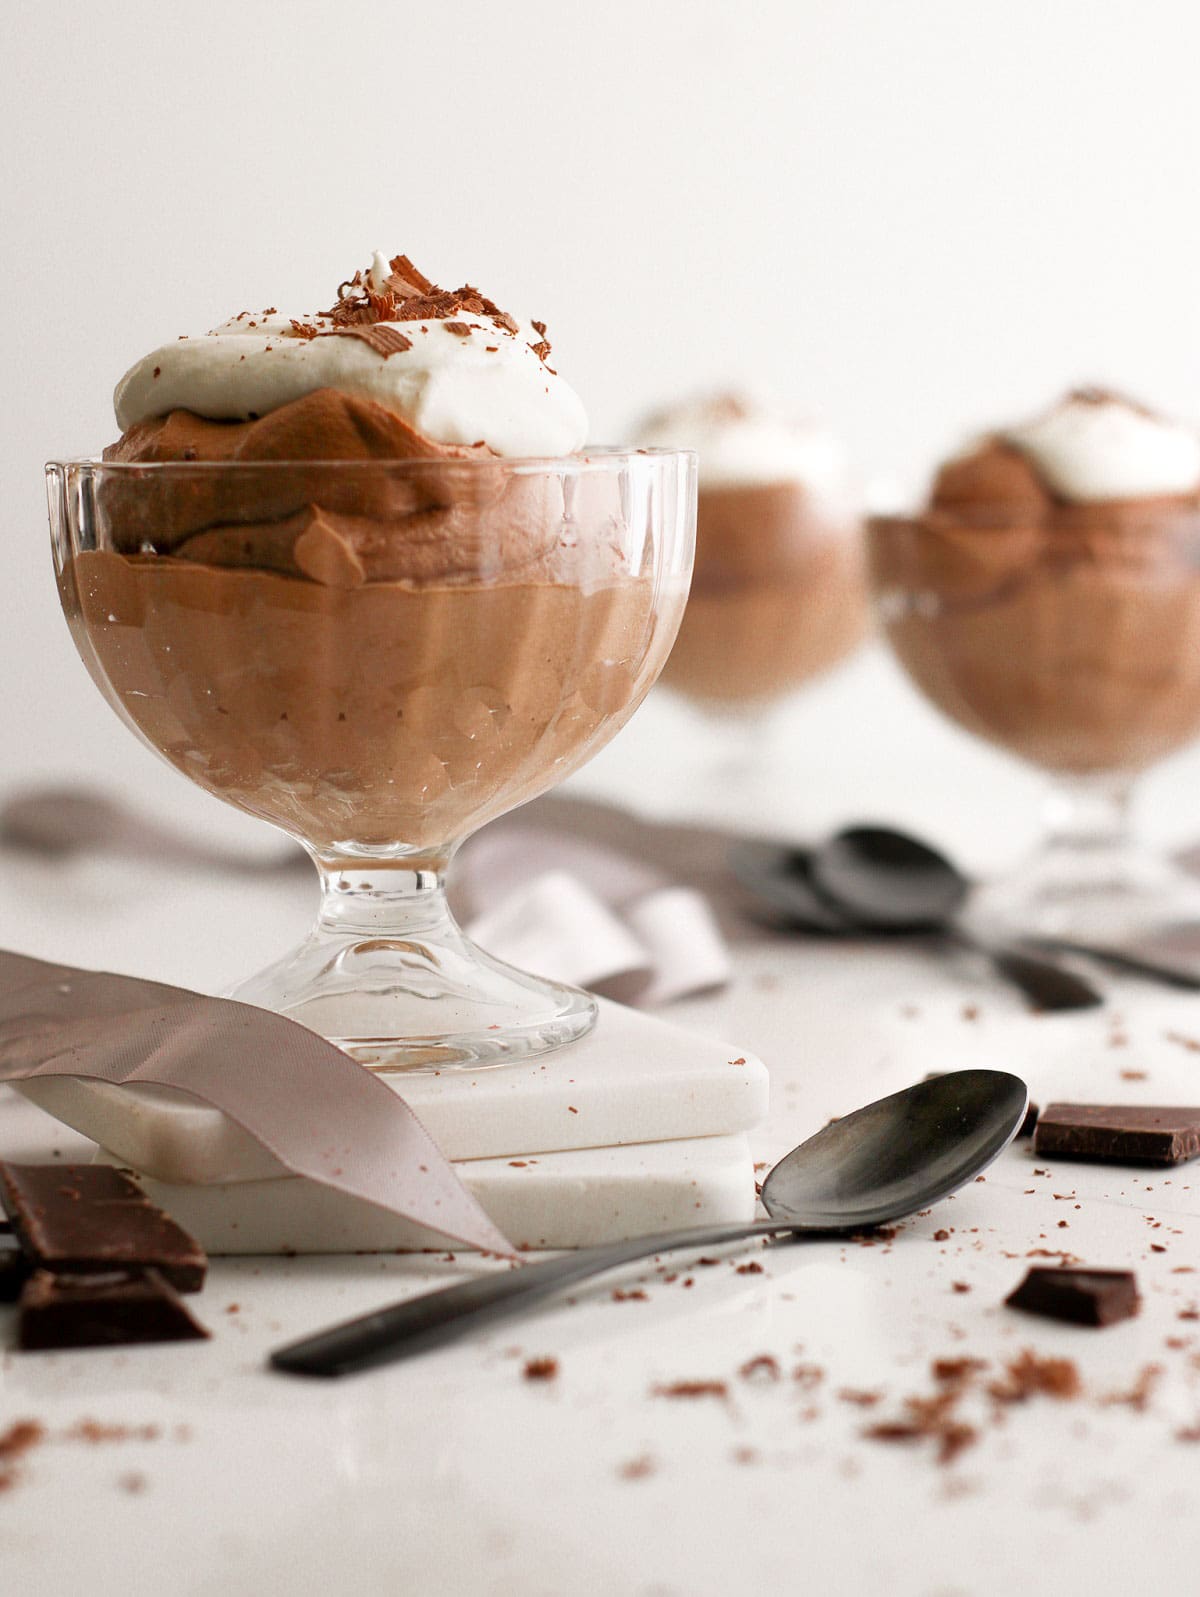 Homemade chocolate mousse in a glass serving dish with a dollop of whipped cream and shaved chocolate on top.